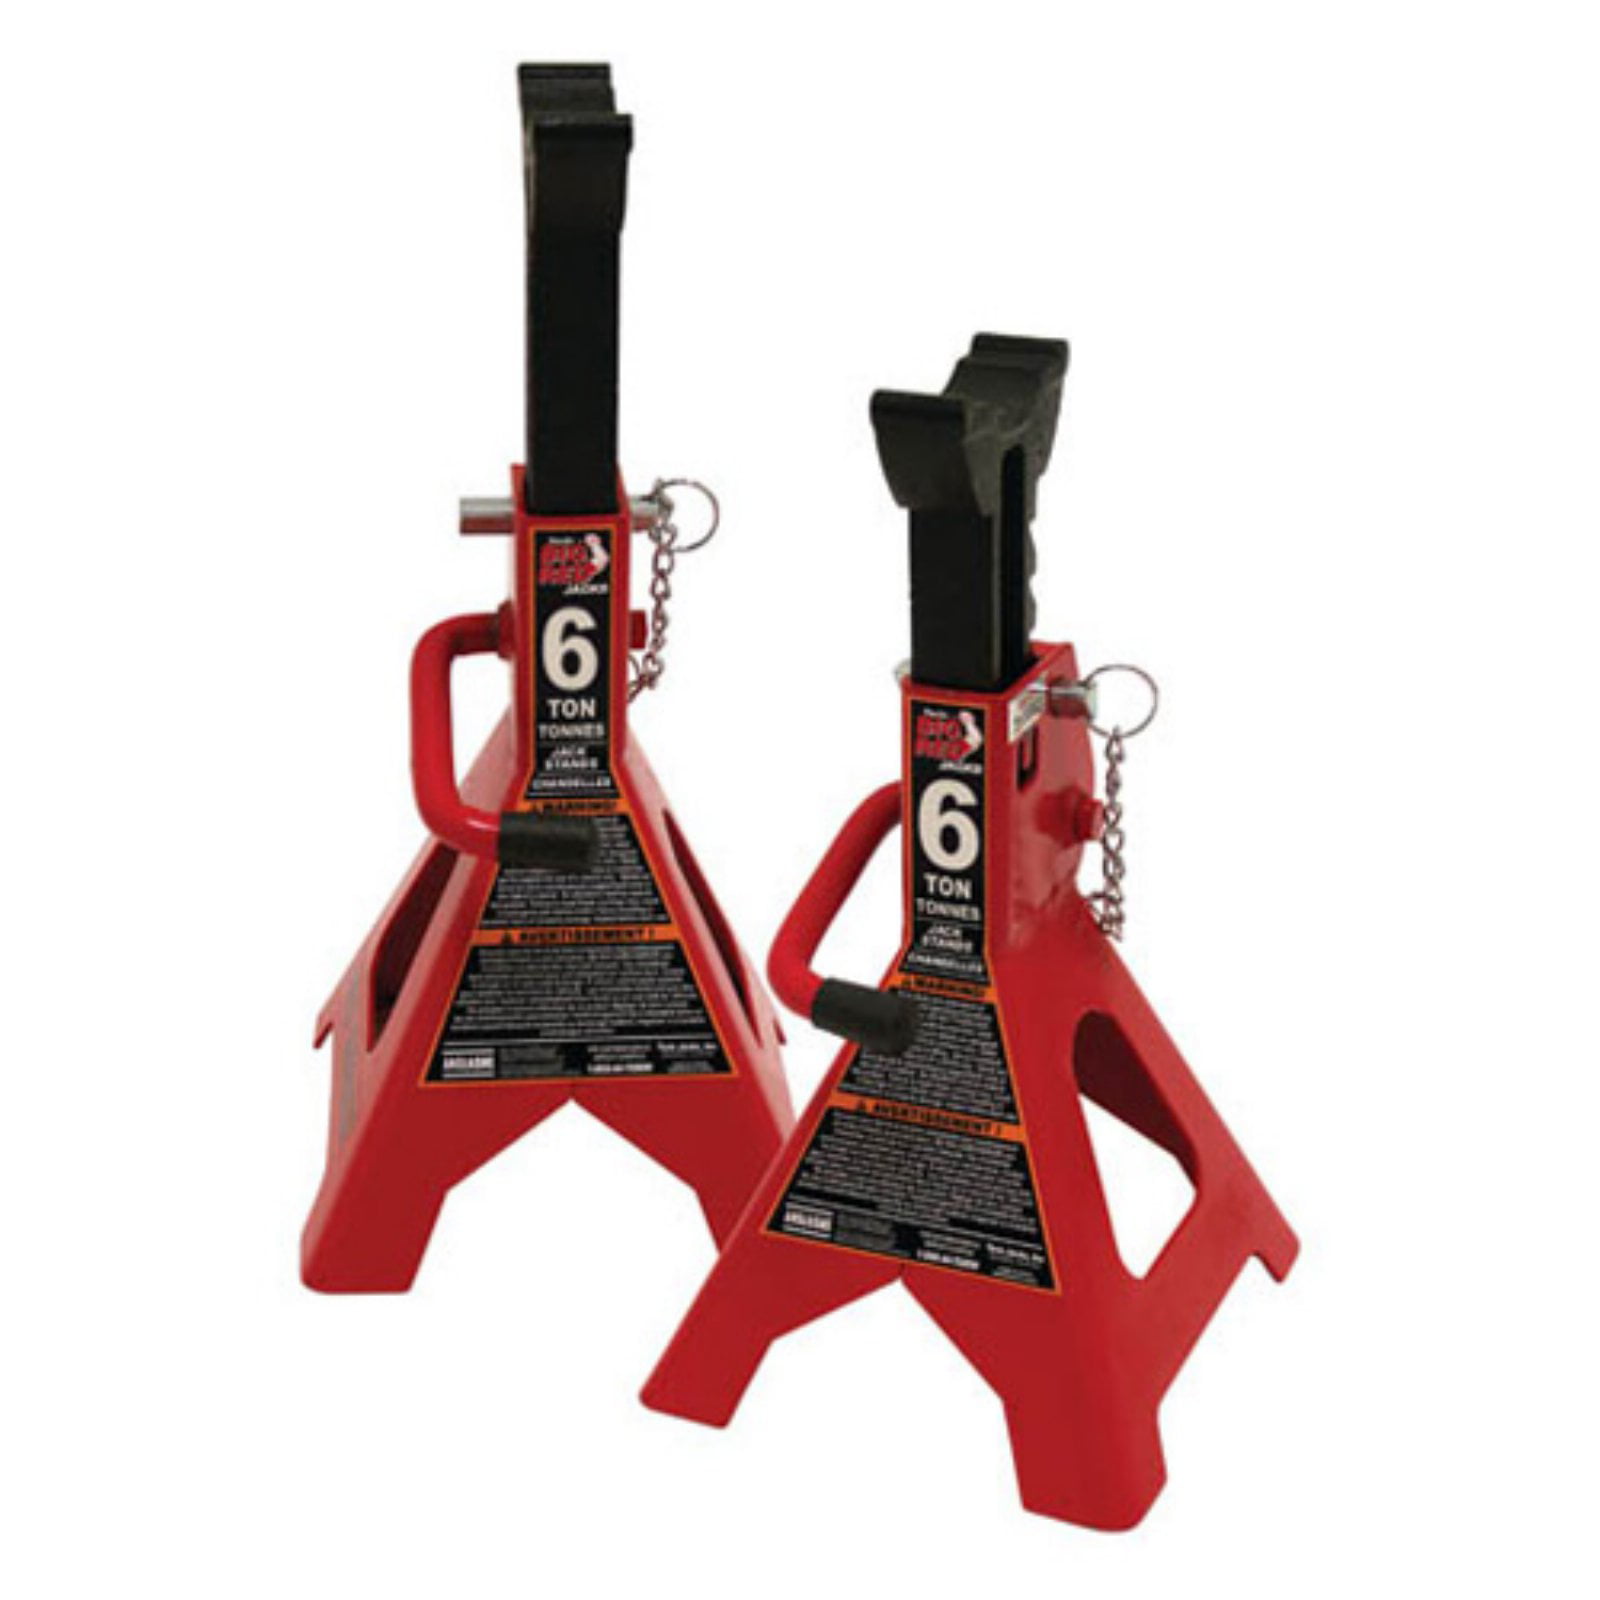 Black Capacity Torin AT46002AB Steel Jack Stands: Double Locking 6 Ton 1 Pair 12,000 lb 